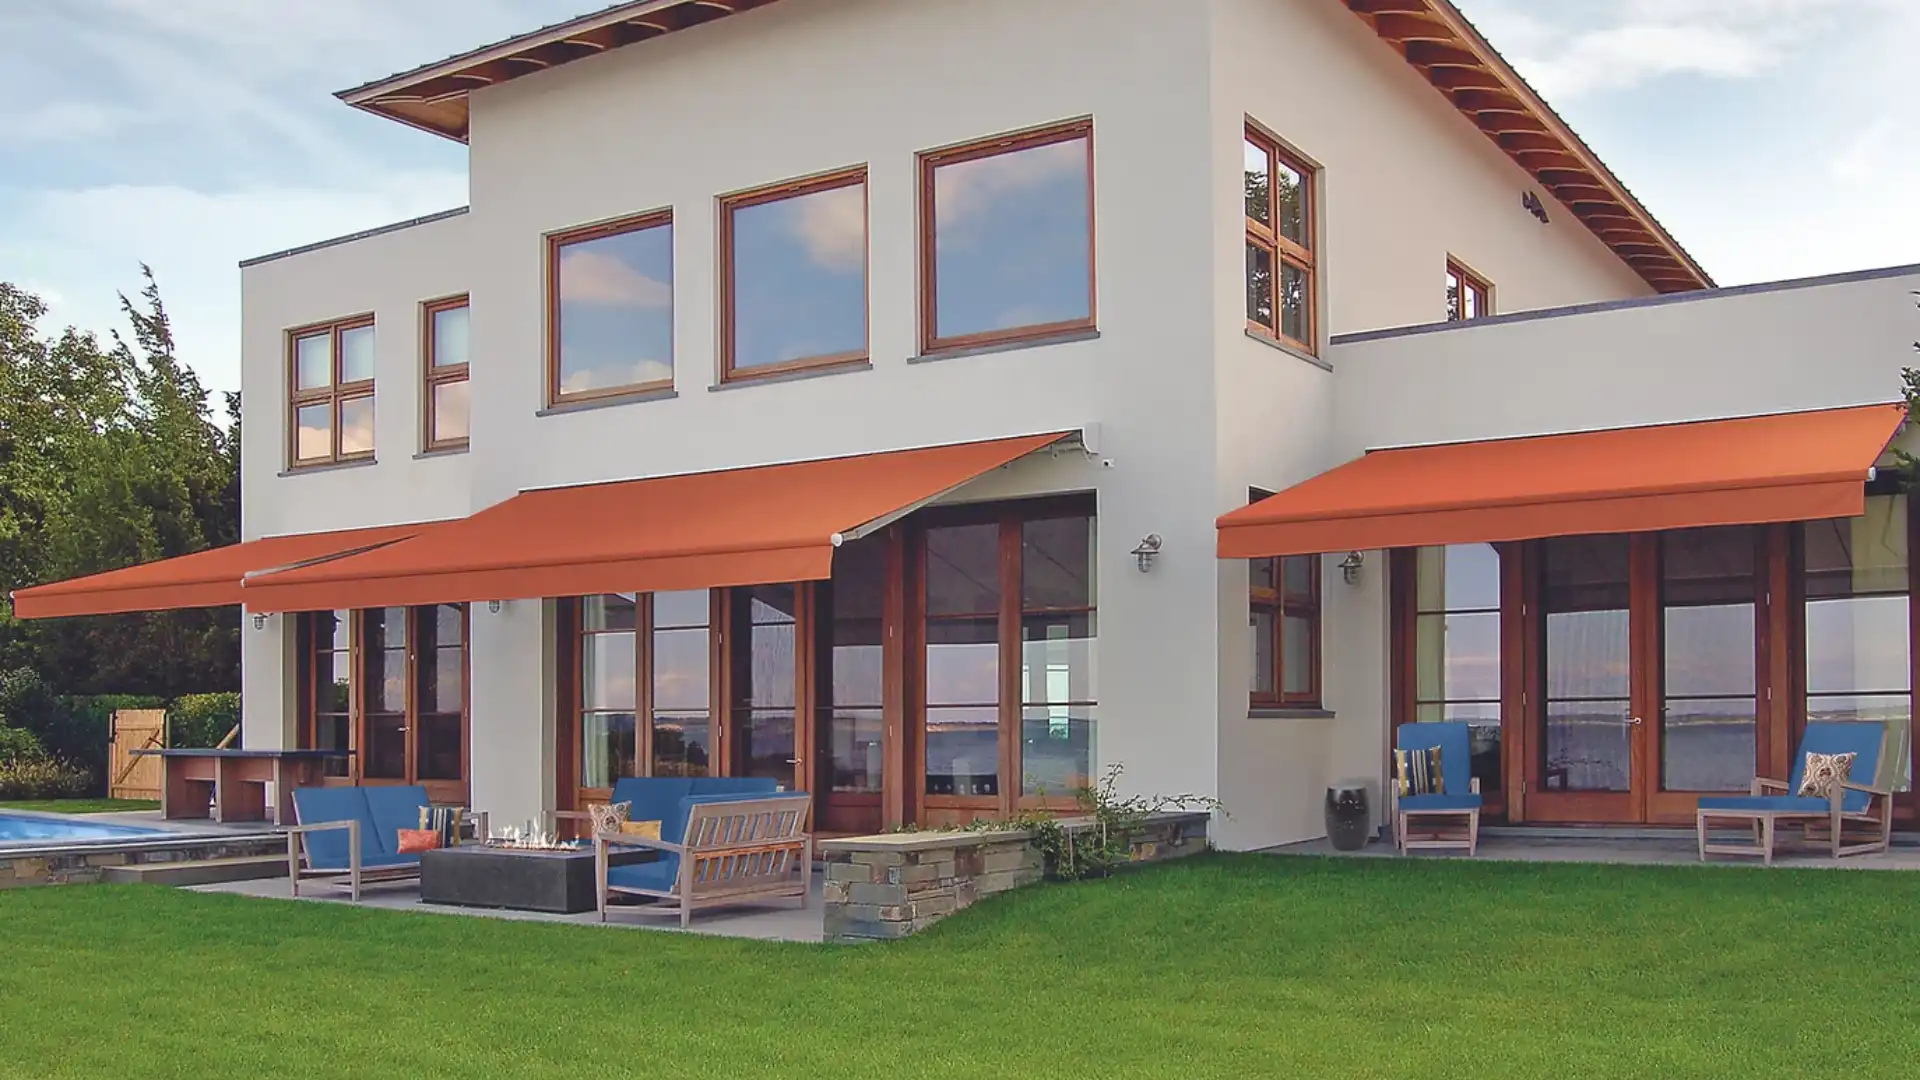 SummerSpace Redefines Outdoor Living With Retractable Awning and Shade Screens Systems